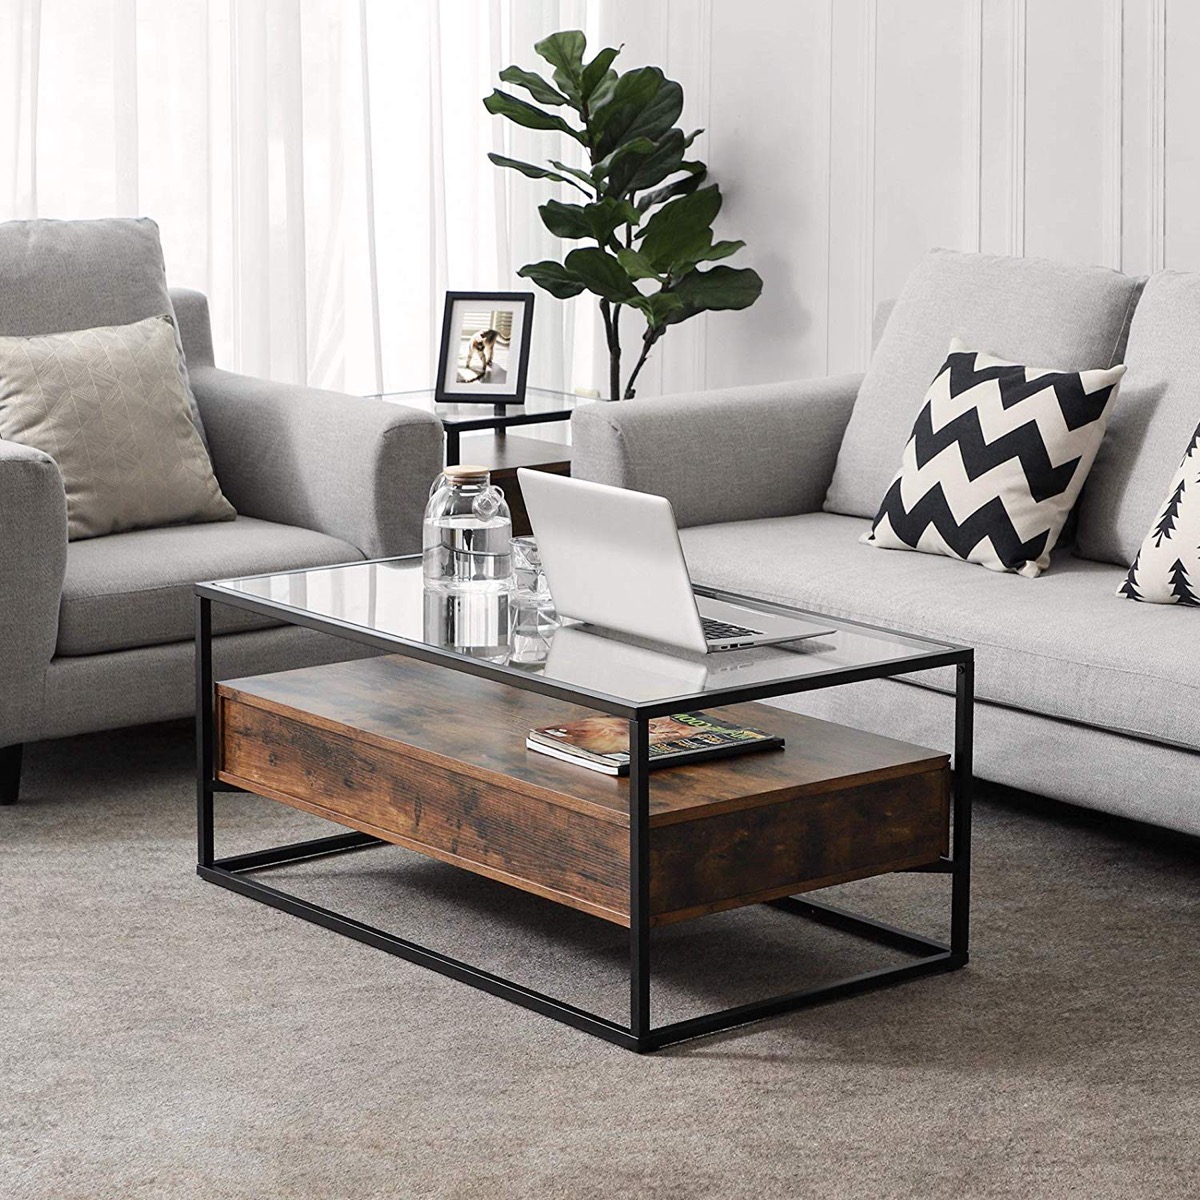 51 Glass Coffee Tables That Every, Coffee Table For The Living Room